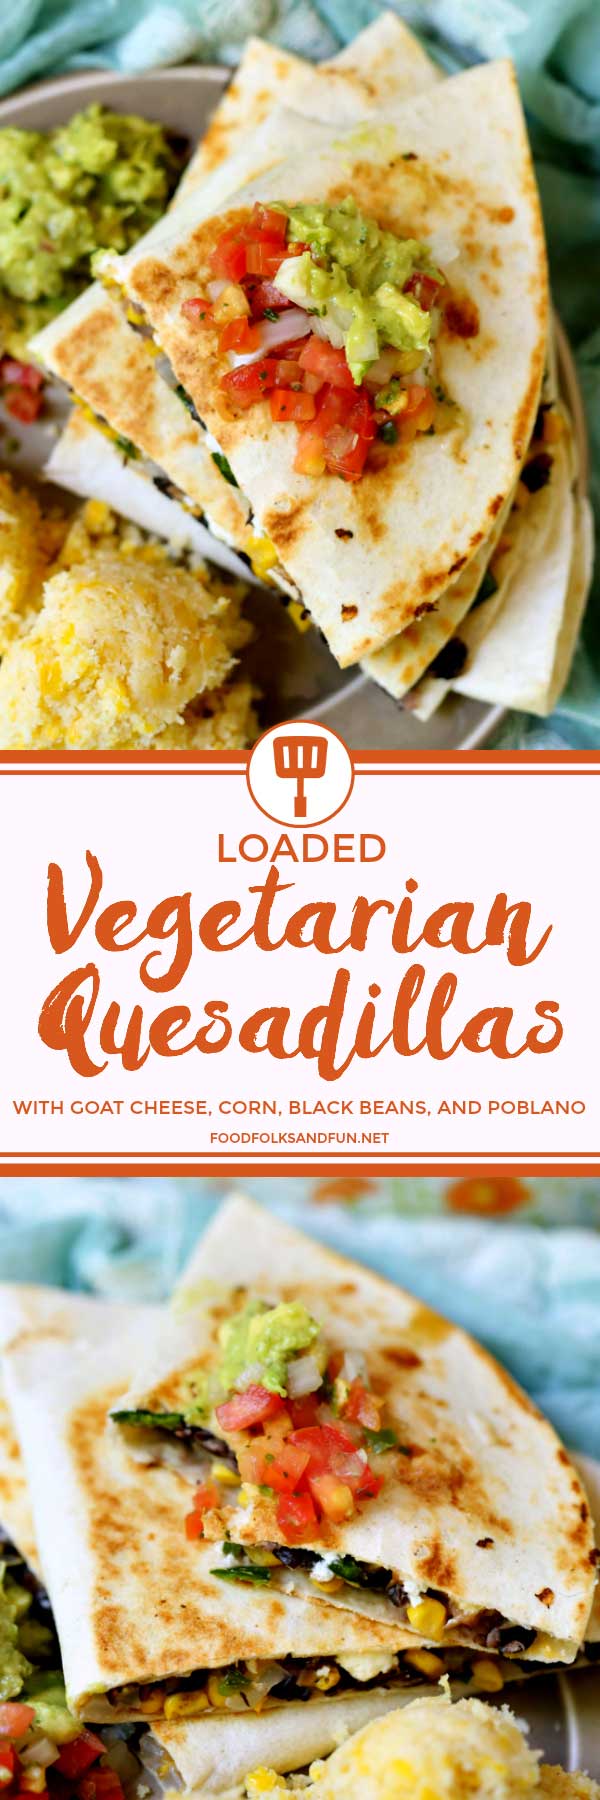 A collage of Loaded Vegetarian Quesadillas with goat cheese, corn, black beans, and poblano with text overlay for Pinterest